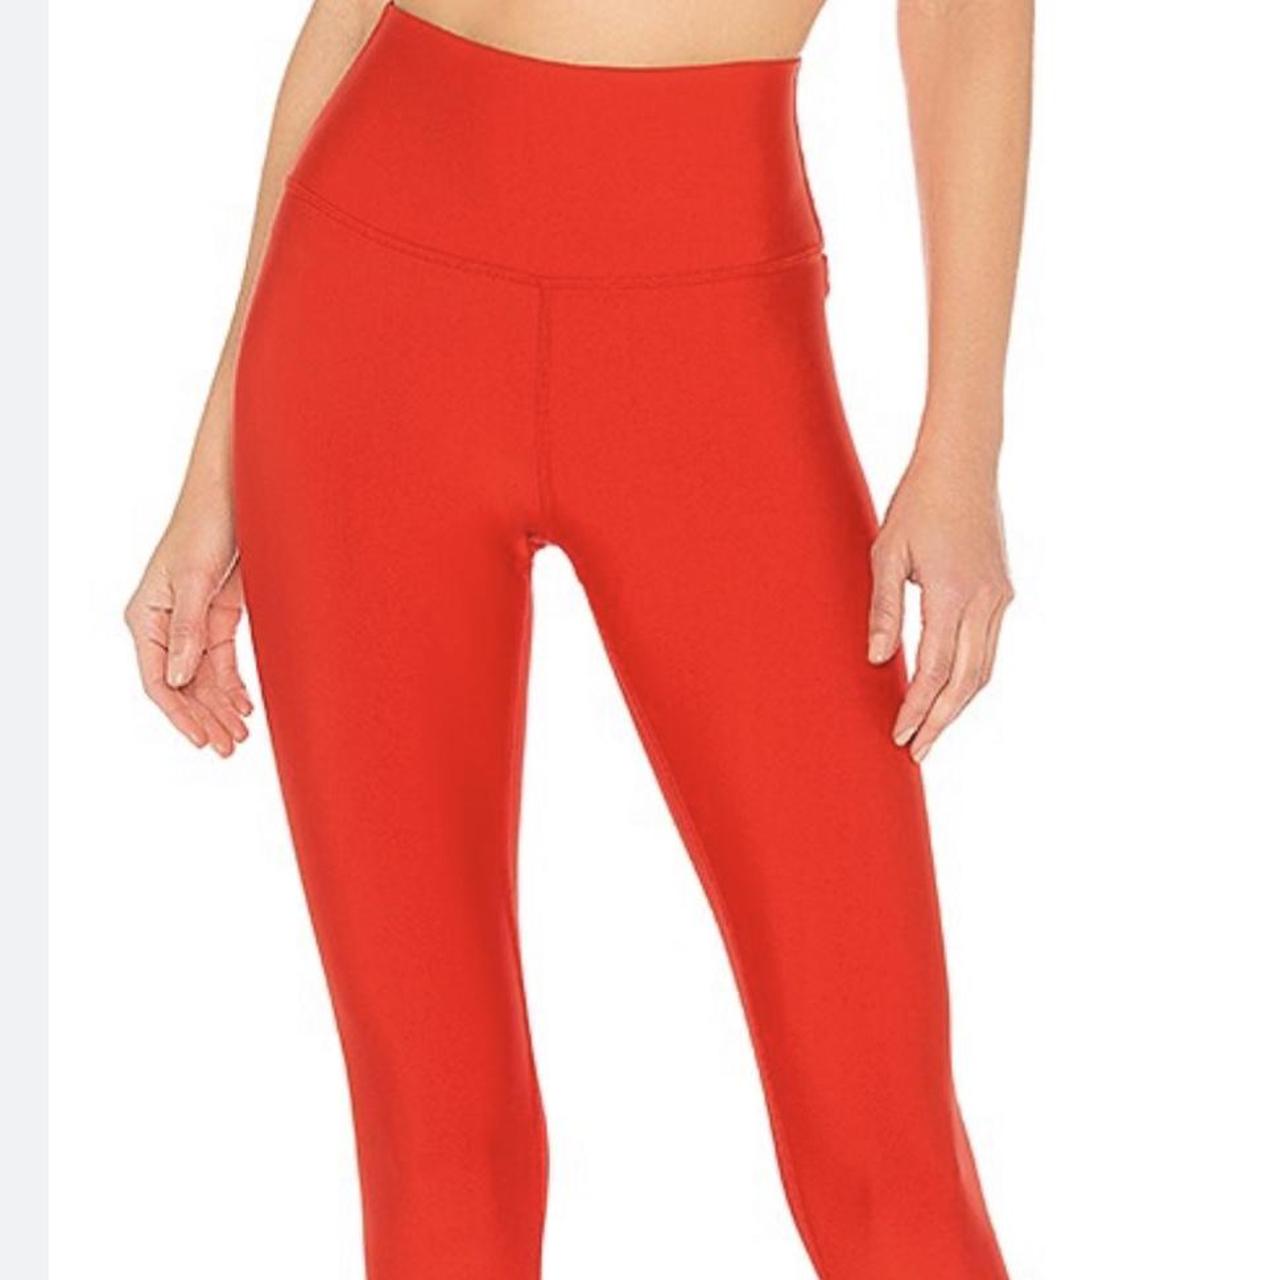 Alo yoga leggings red/pinkish color! Only worn a few - Depop